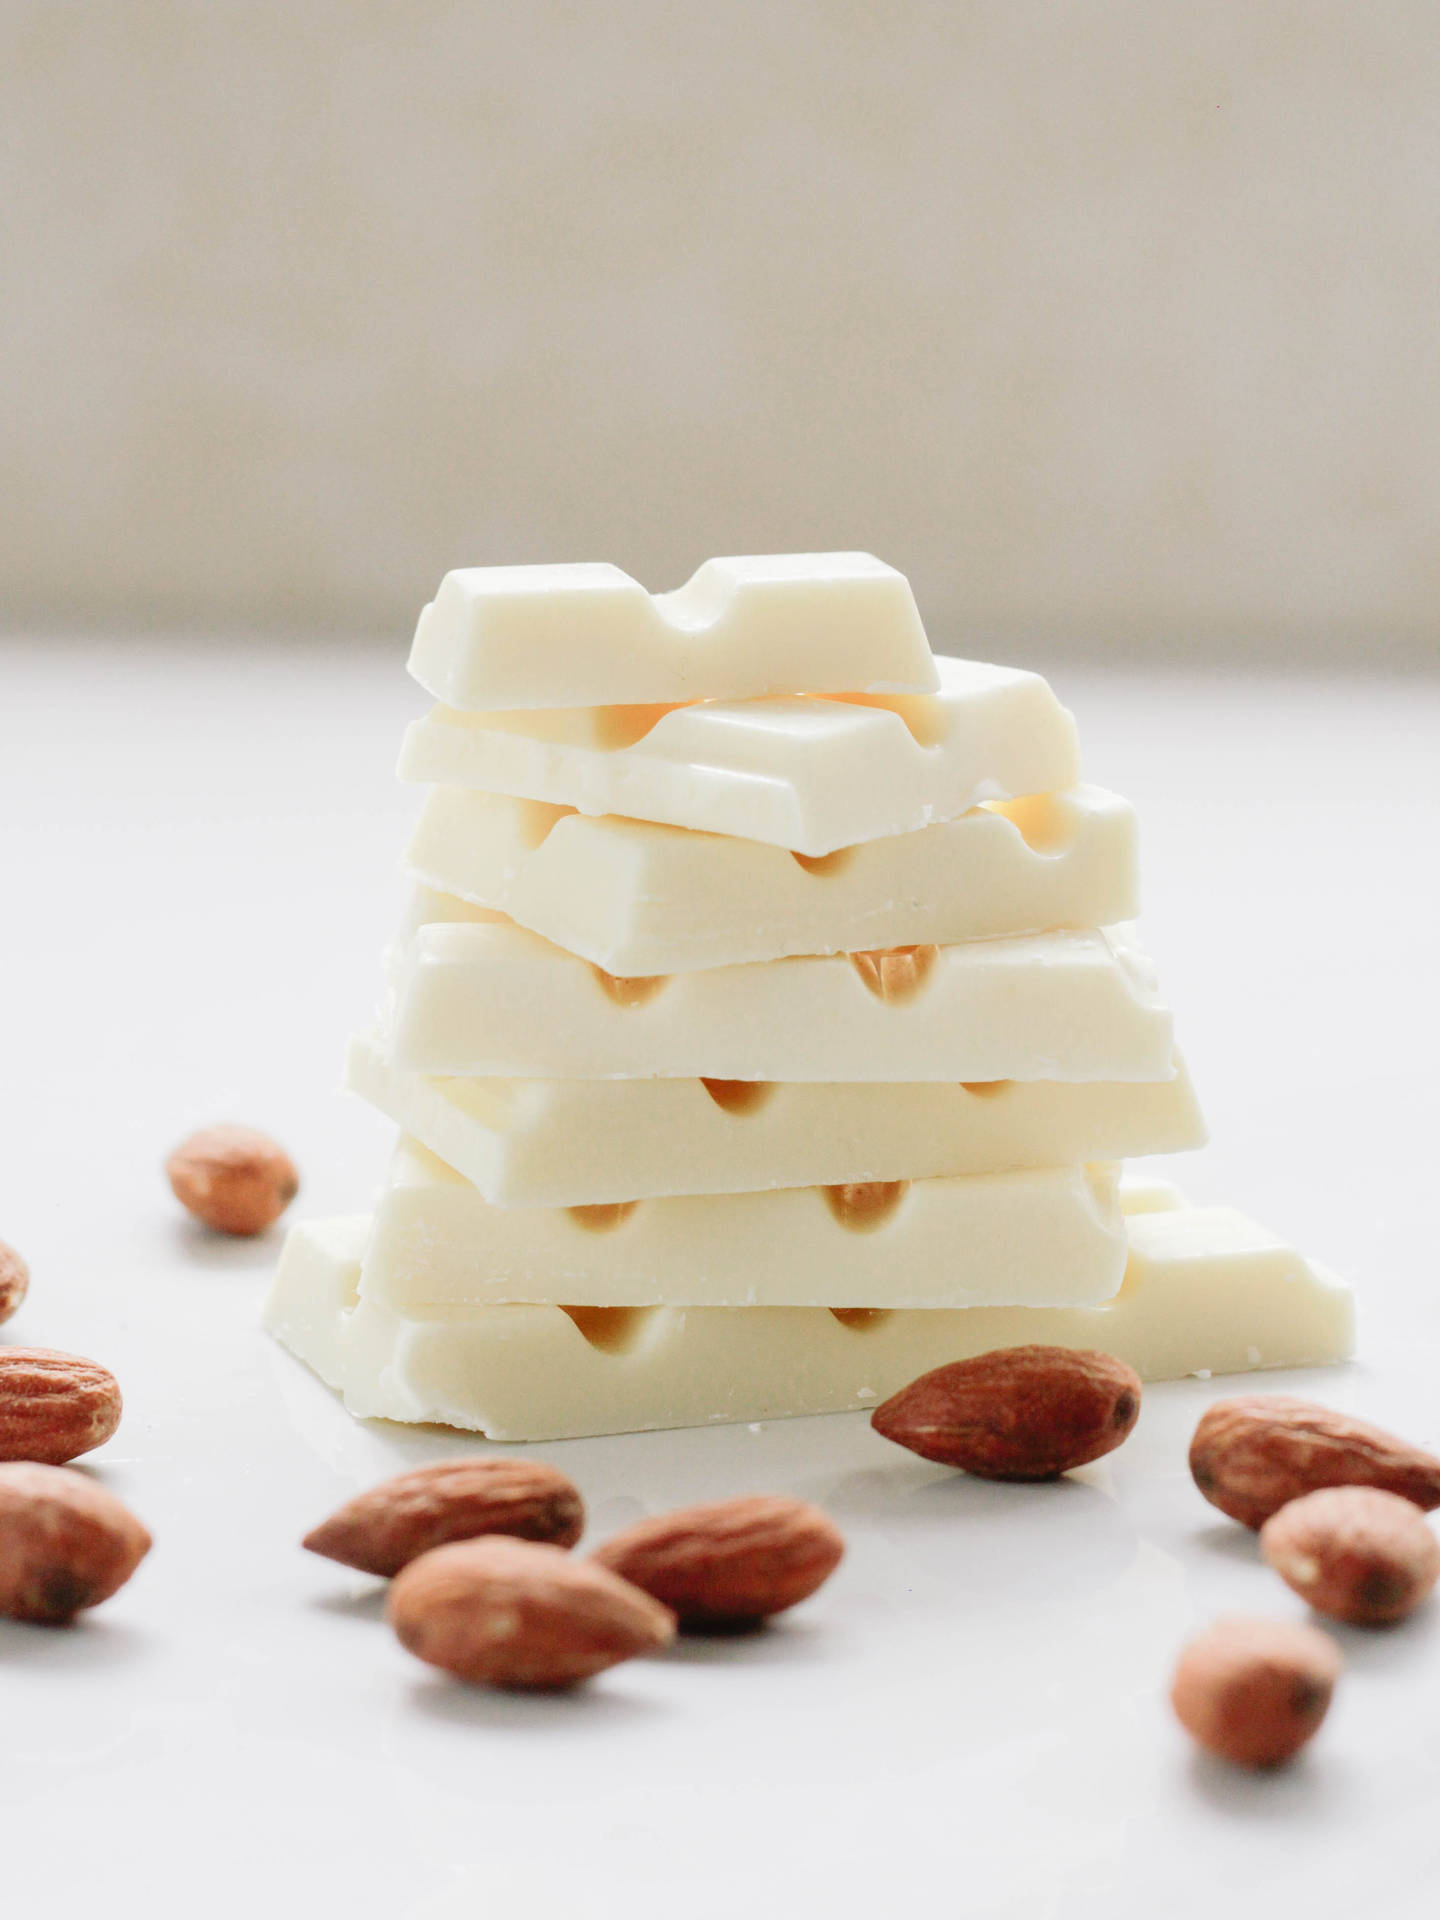 White Chocolate Bars And Almonds Background